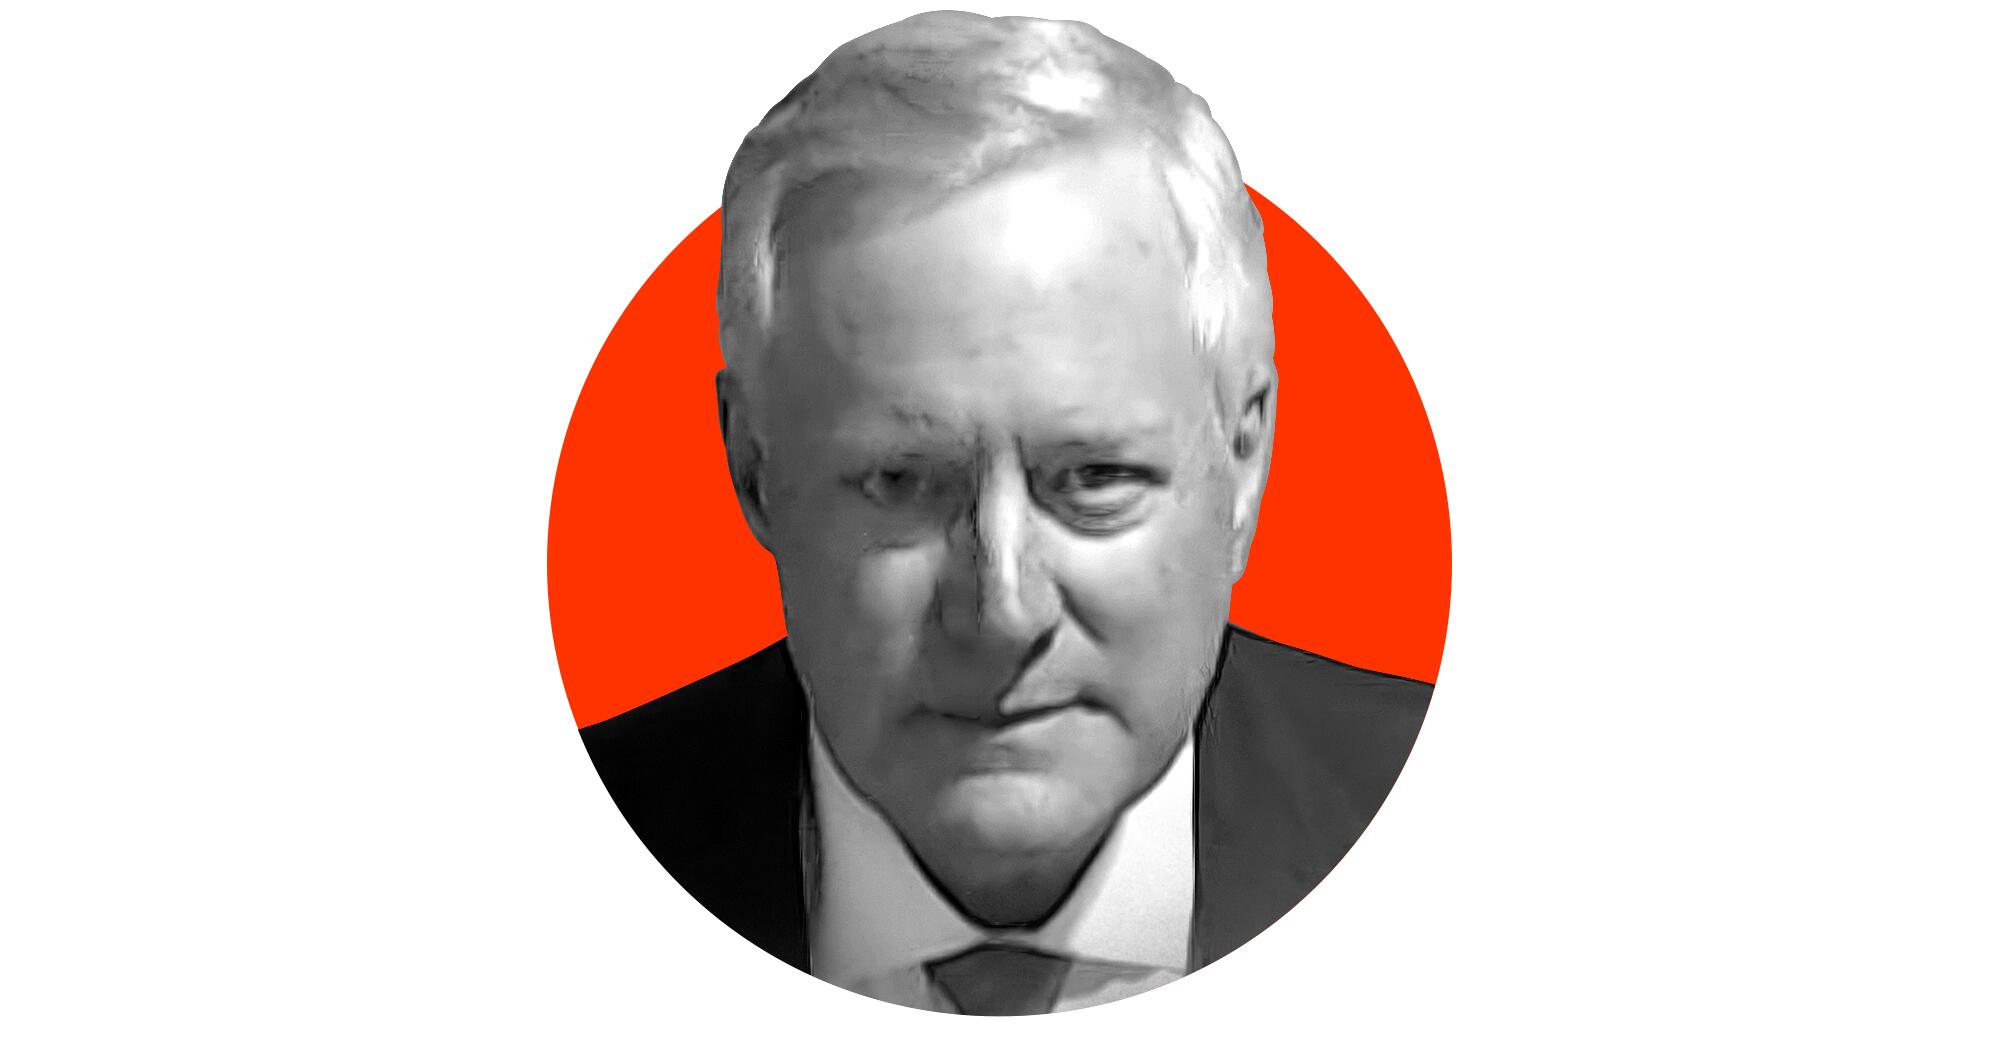 A photo illustration of a black-and-white police booking photo of former Trump aide Mark Meadows emerging from a red circle